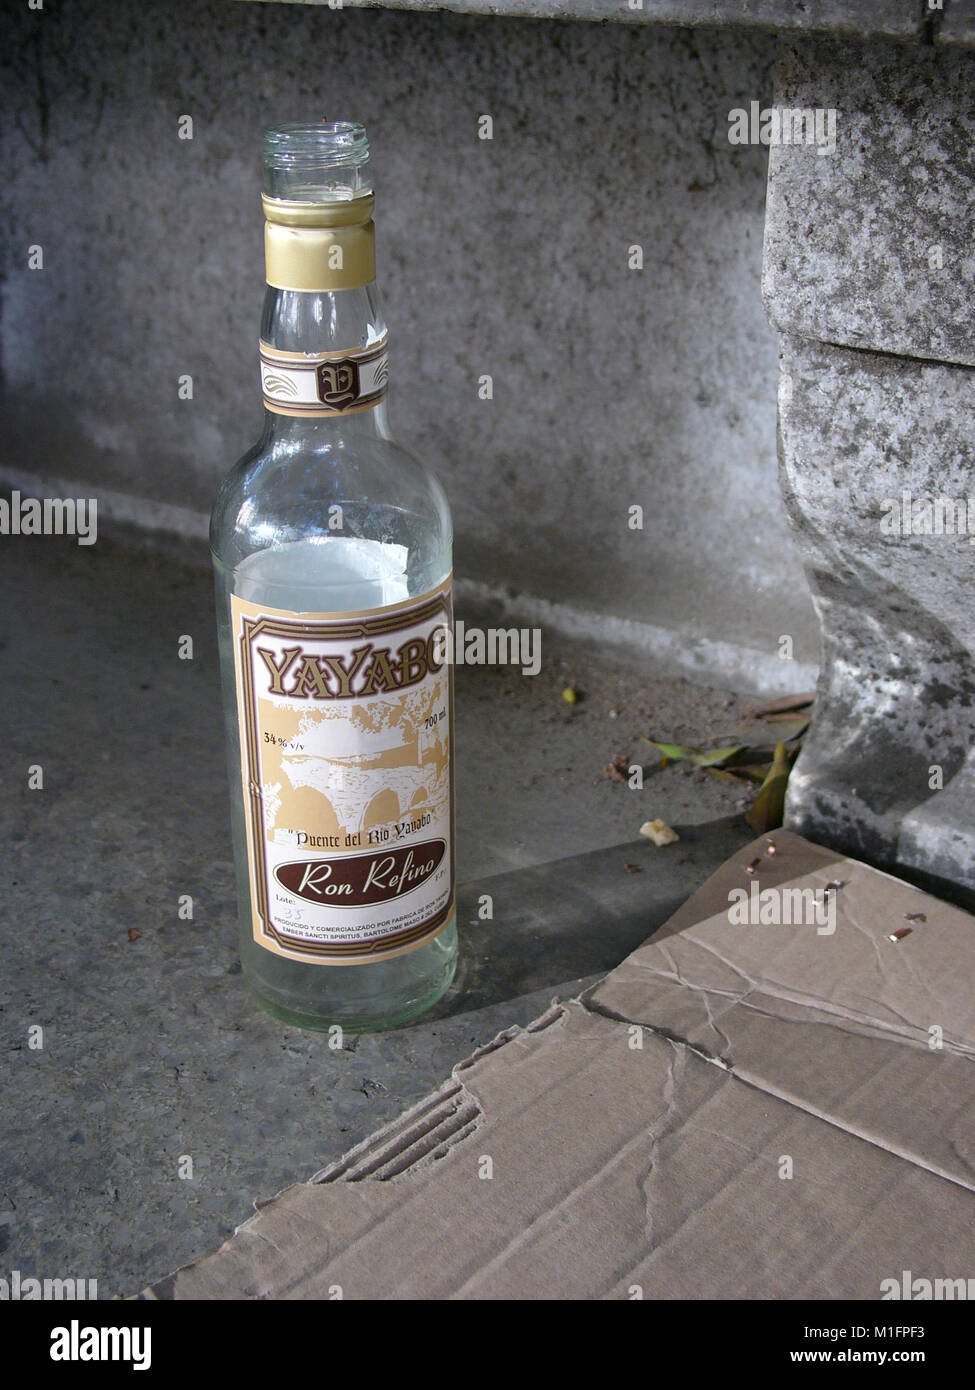 Mar 28, 2006 - Havana, CUBA - Empty bottle of Cuban rum sits next to a homeless persons cardboard box bed. The Republic of Cuba is located in the northern Caribbean and south of the United States. The first European to visit Cuba was explorer Christopher Columbus in 1492. Centuries of colonial rule and revolutions followed. Batista was deposed by Fidel Castro and Che guevara in 1953. After the revolution trade with comminist Russia grew. The economy was hit hard in the 1990s following the collapse of the Soviet Union. Cuba currently trades with almost every nation in the world, albeit with res Stock Photo